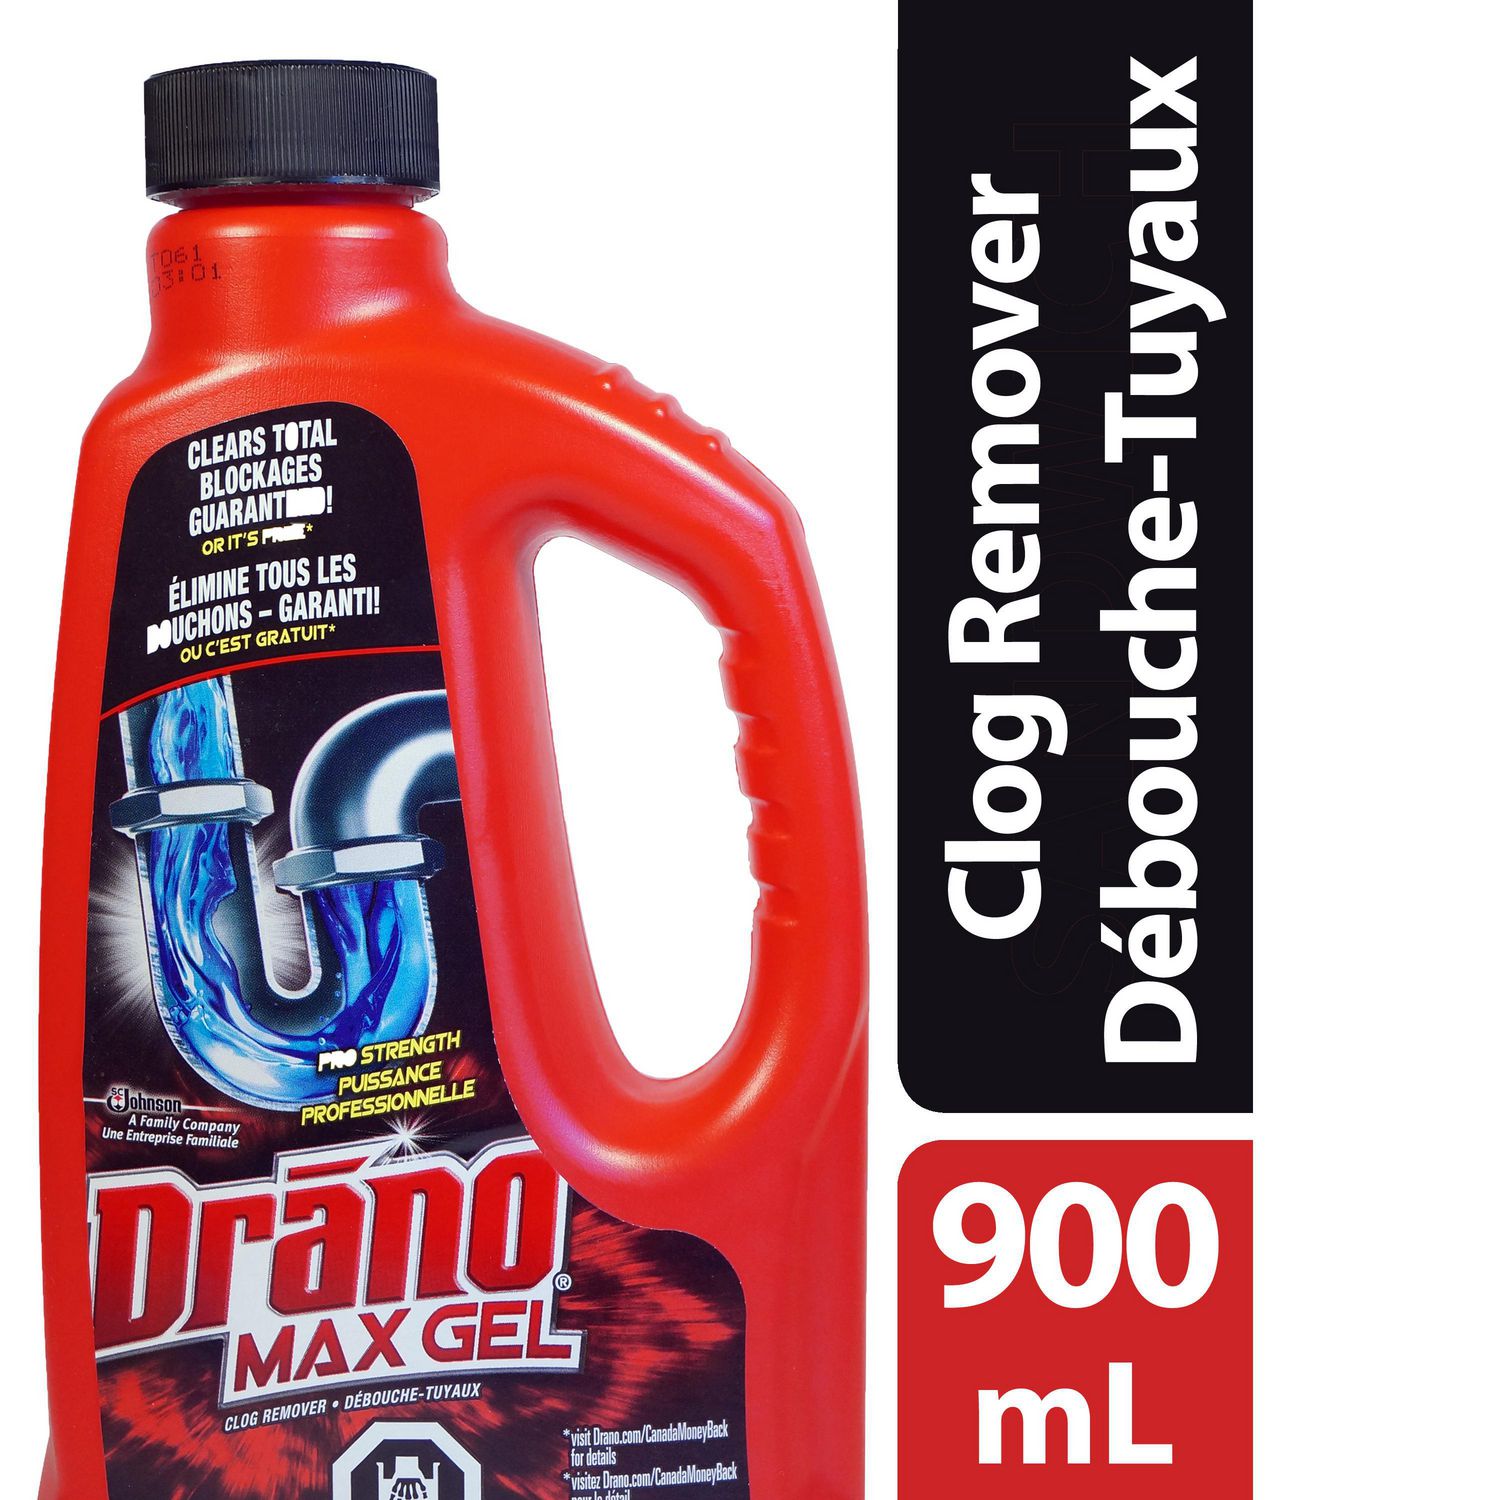 Drano Max Gel Drain Cleaner and Clog 